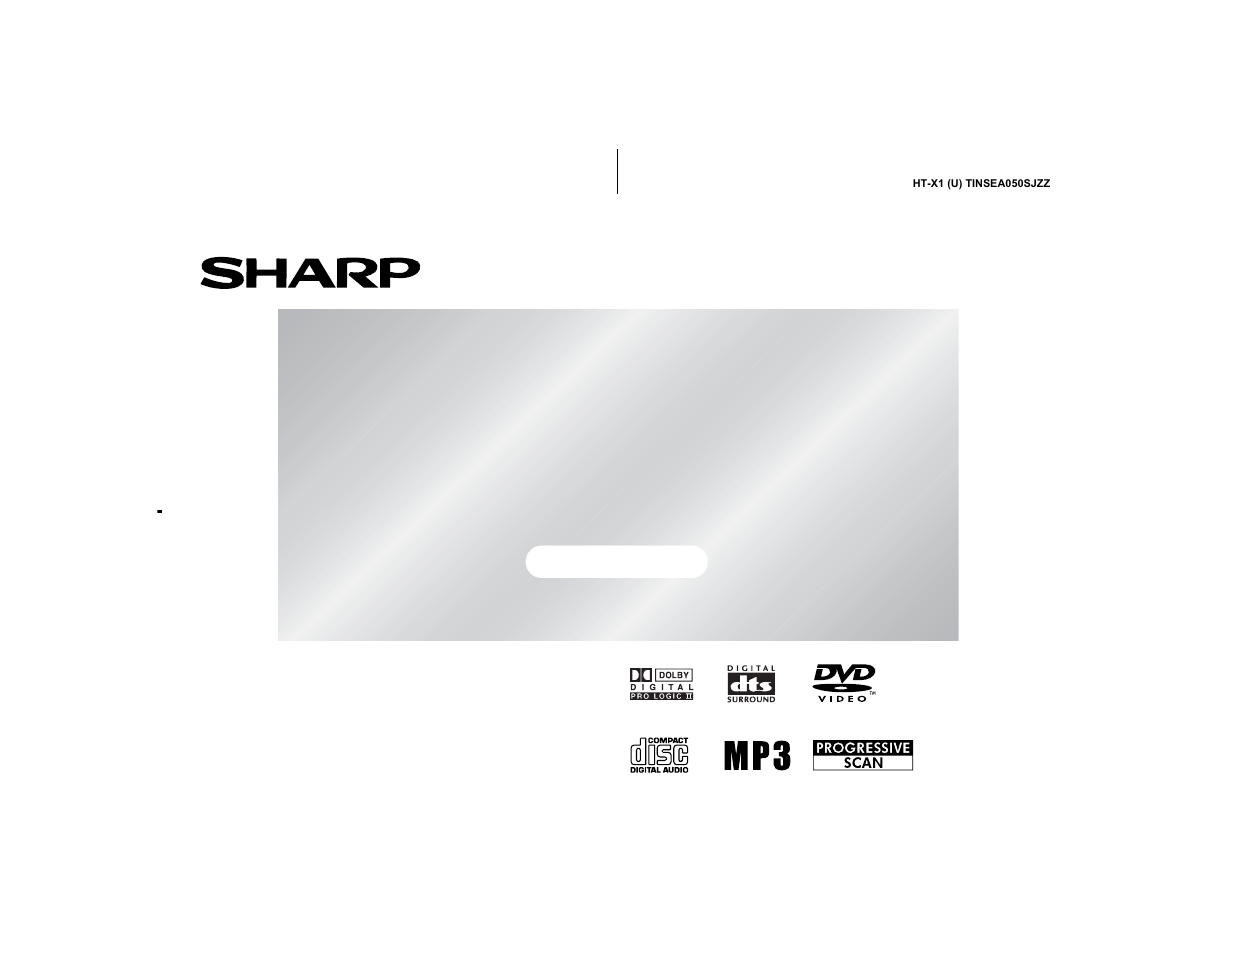 Sharp HT-X1 User Manual | 68 pages